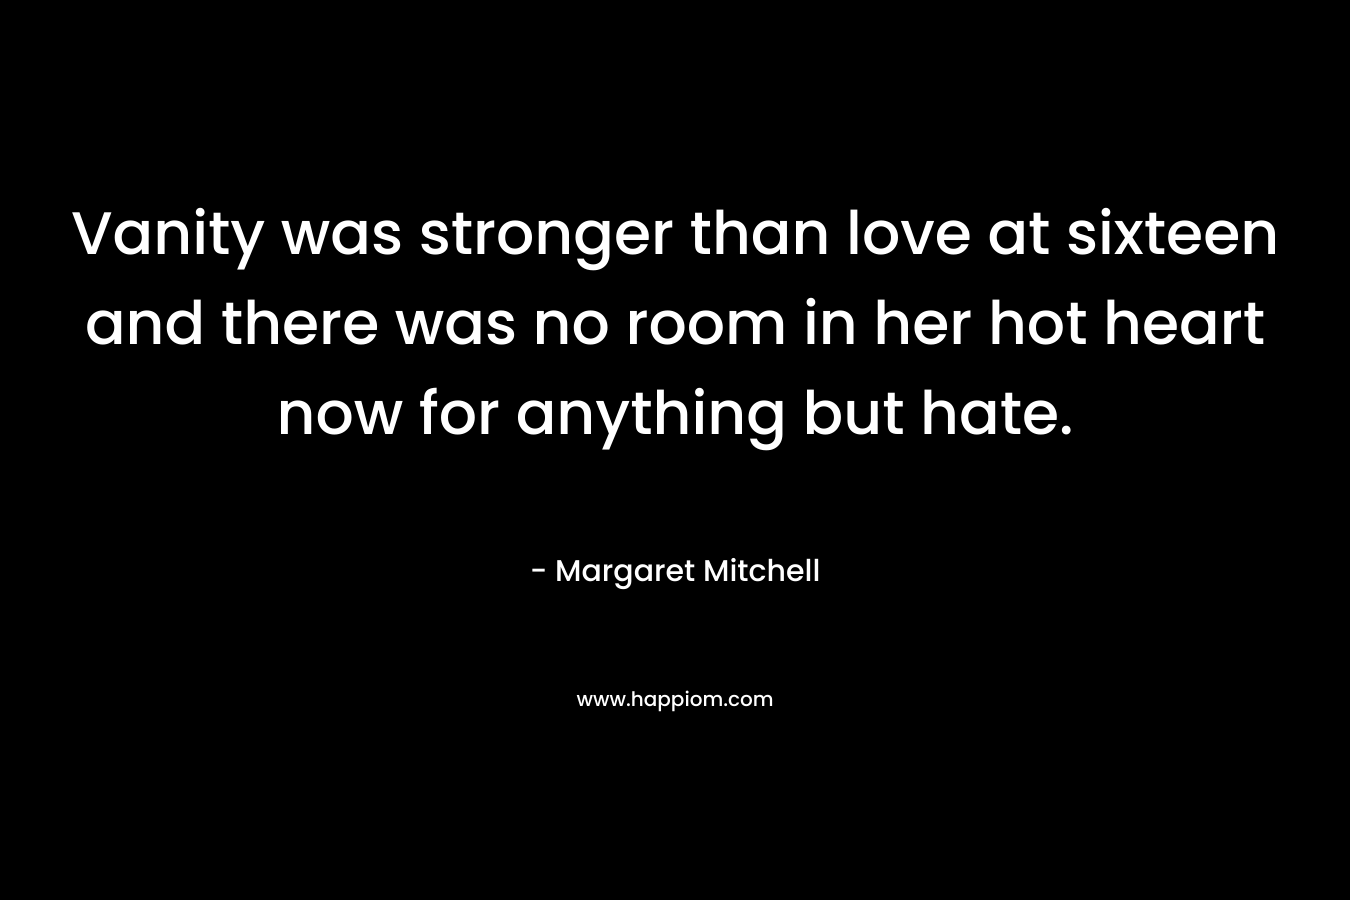 Vanity was stronger than love at sixteen and there was no room in her hot heart now for anything but hate. – Margaret Mitchell